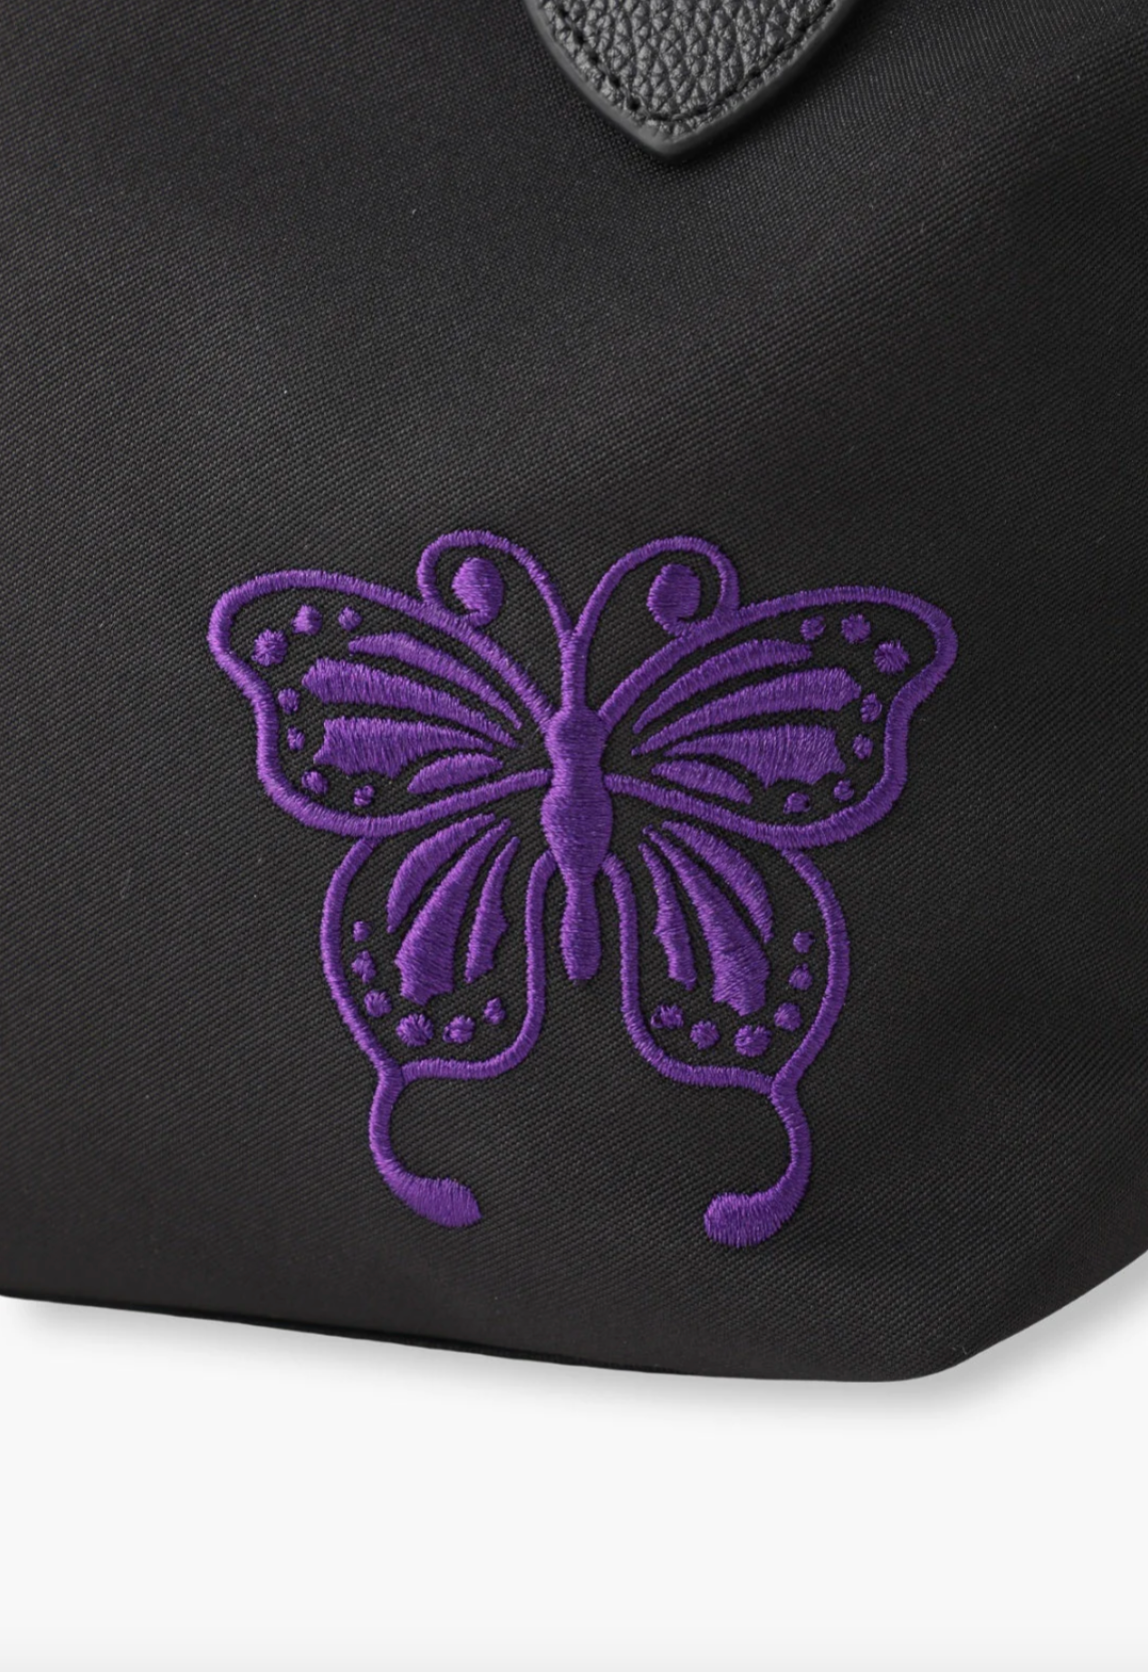 Small Voyage Tote black, Anna Sui purple embroidered Butterfly signature bottom right of the bag